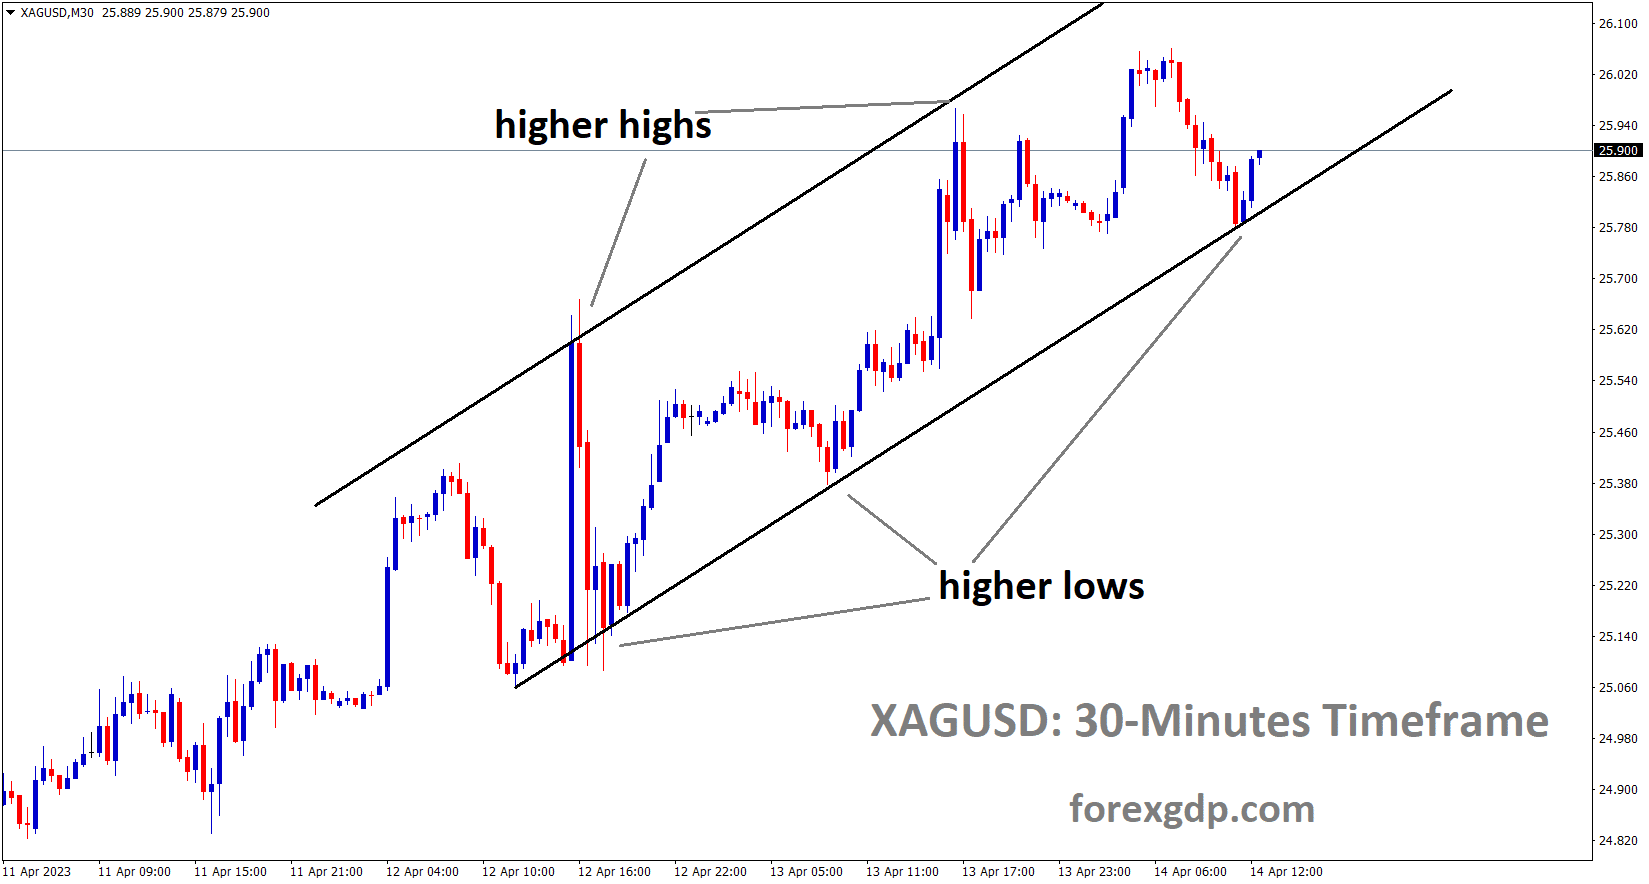 XAGUSD Silver Price is moving in an Ascending channel and the market has rebounded from the higher low area of the channel 1